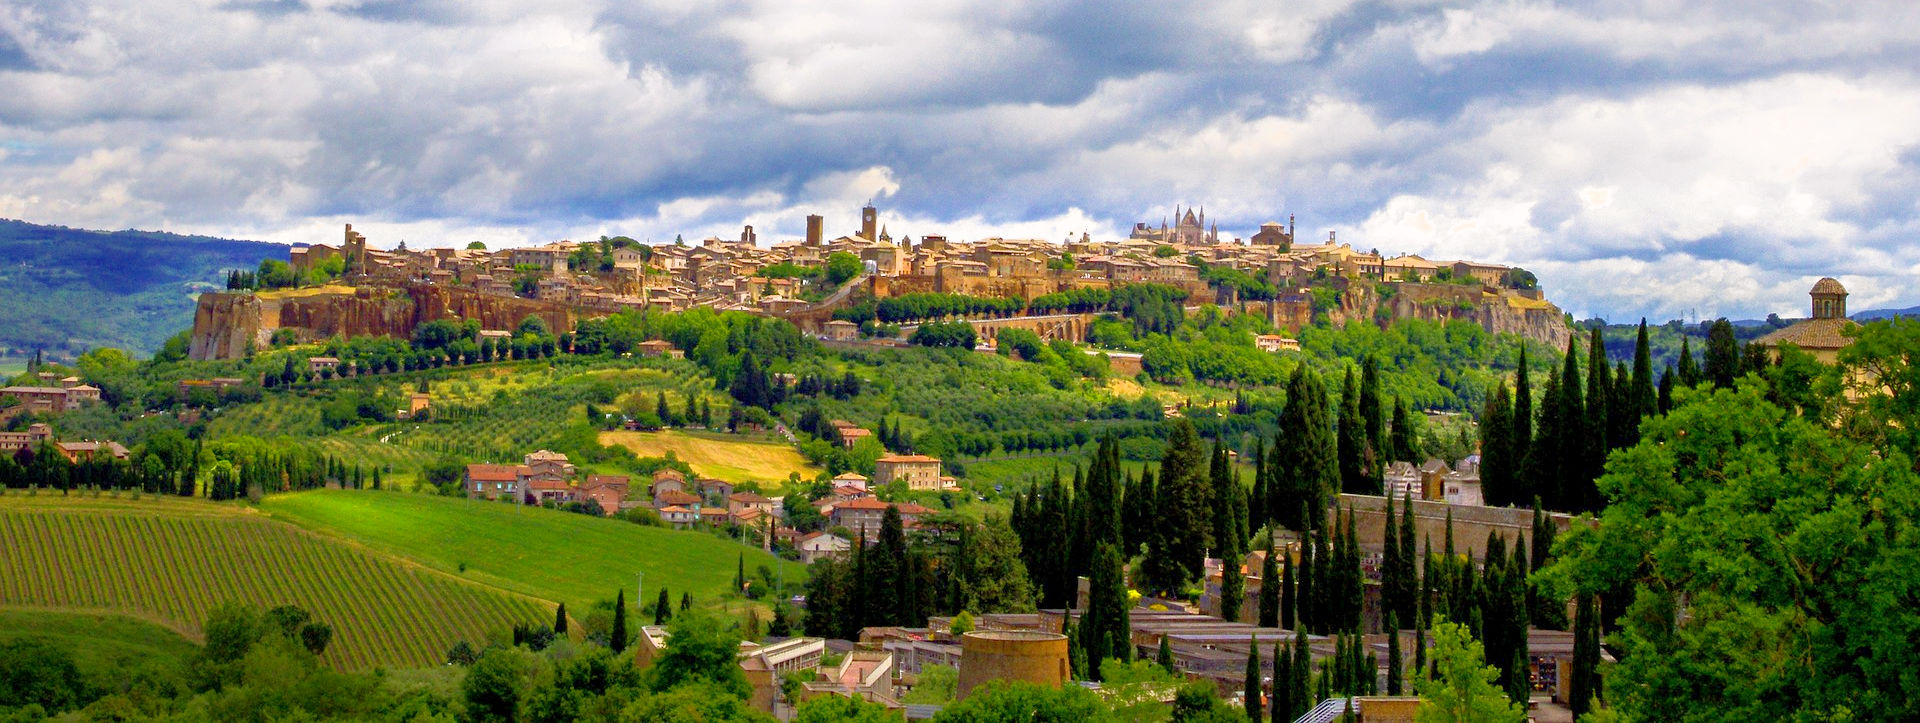 Wine Tasting Tours to Orvieto Winery from Rome